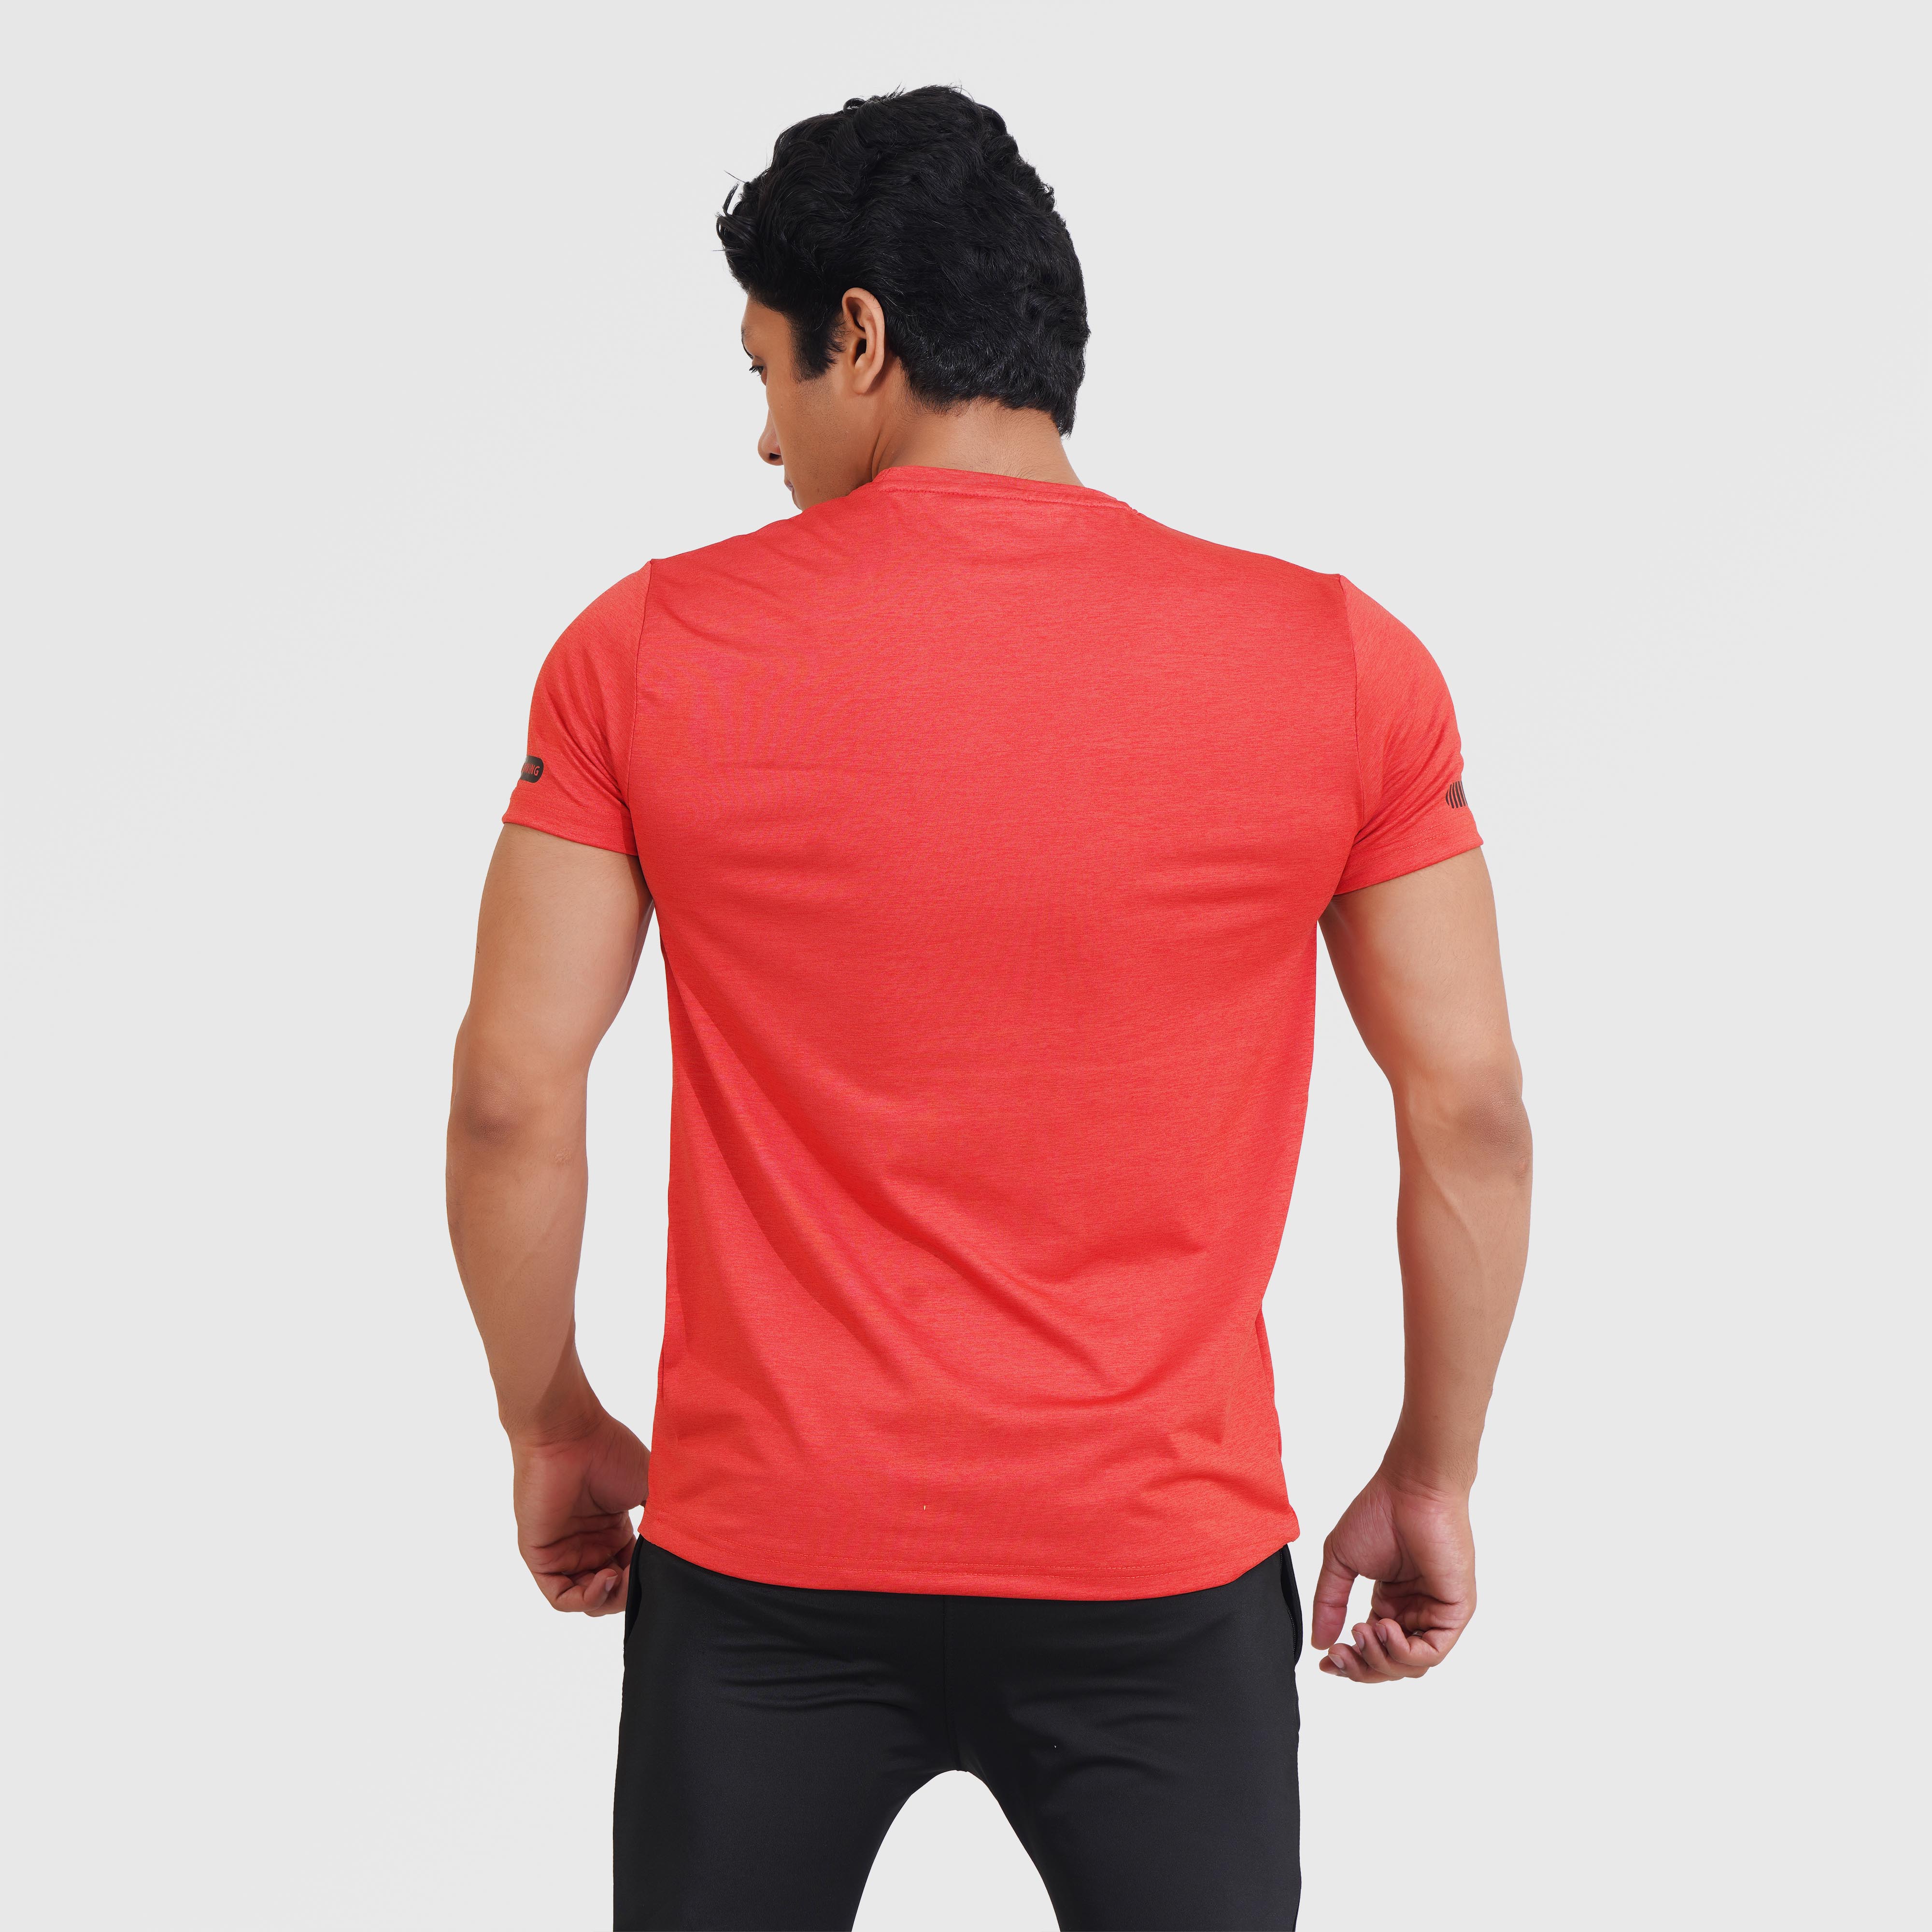 EliteFit FIRE Compression TEE